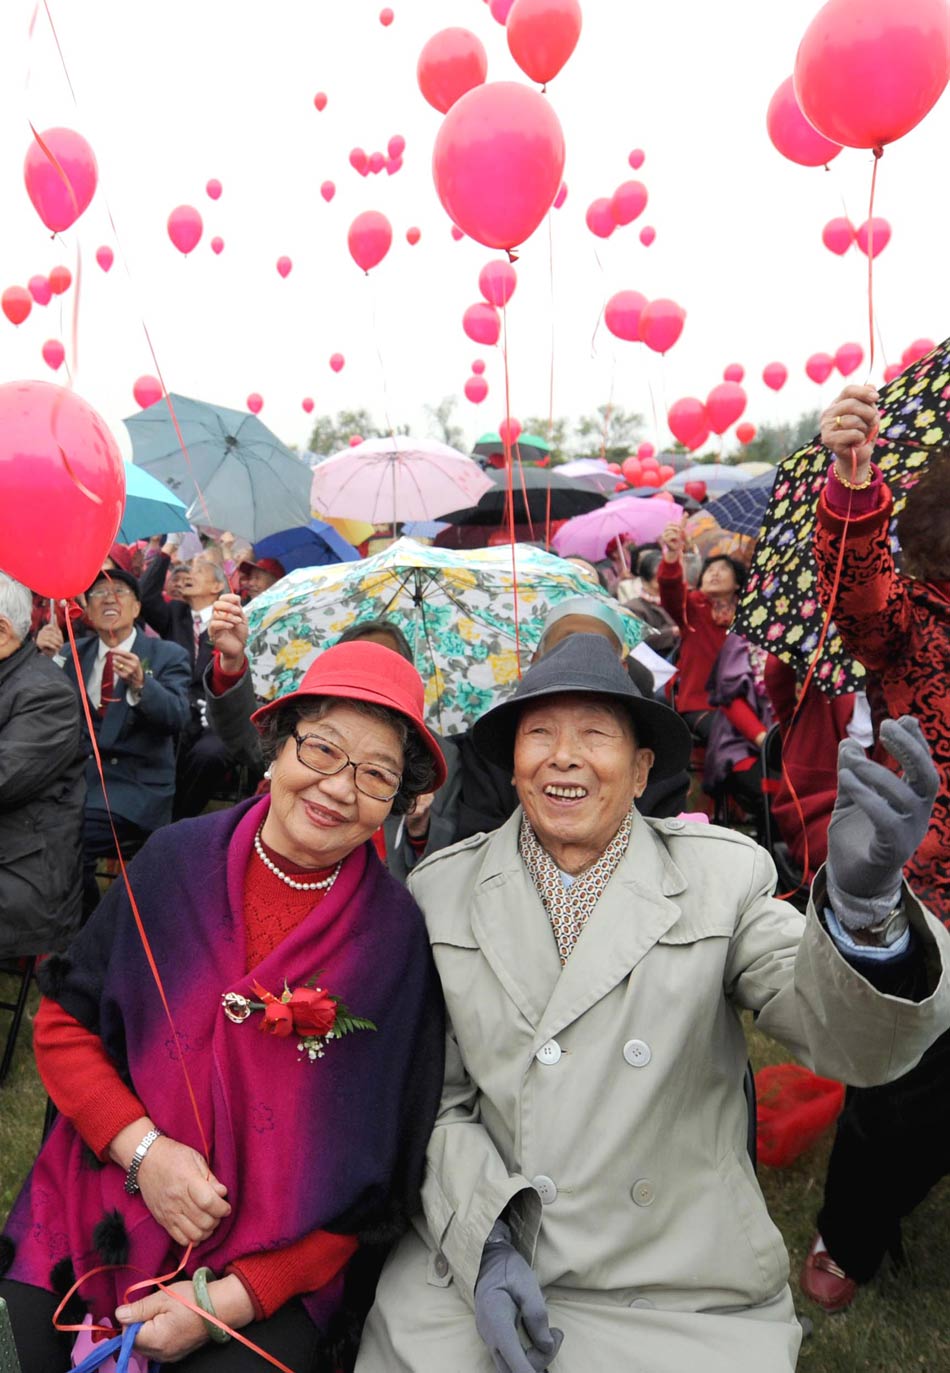 One hundred golden couples review their love journeys in Summer Palace, Beijing, Oct. 21, 2012. (Xinhua/Luo Xiaoguang)